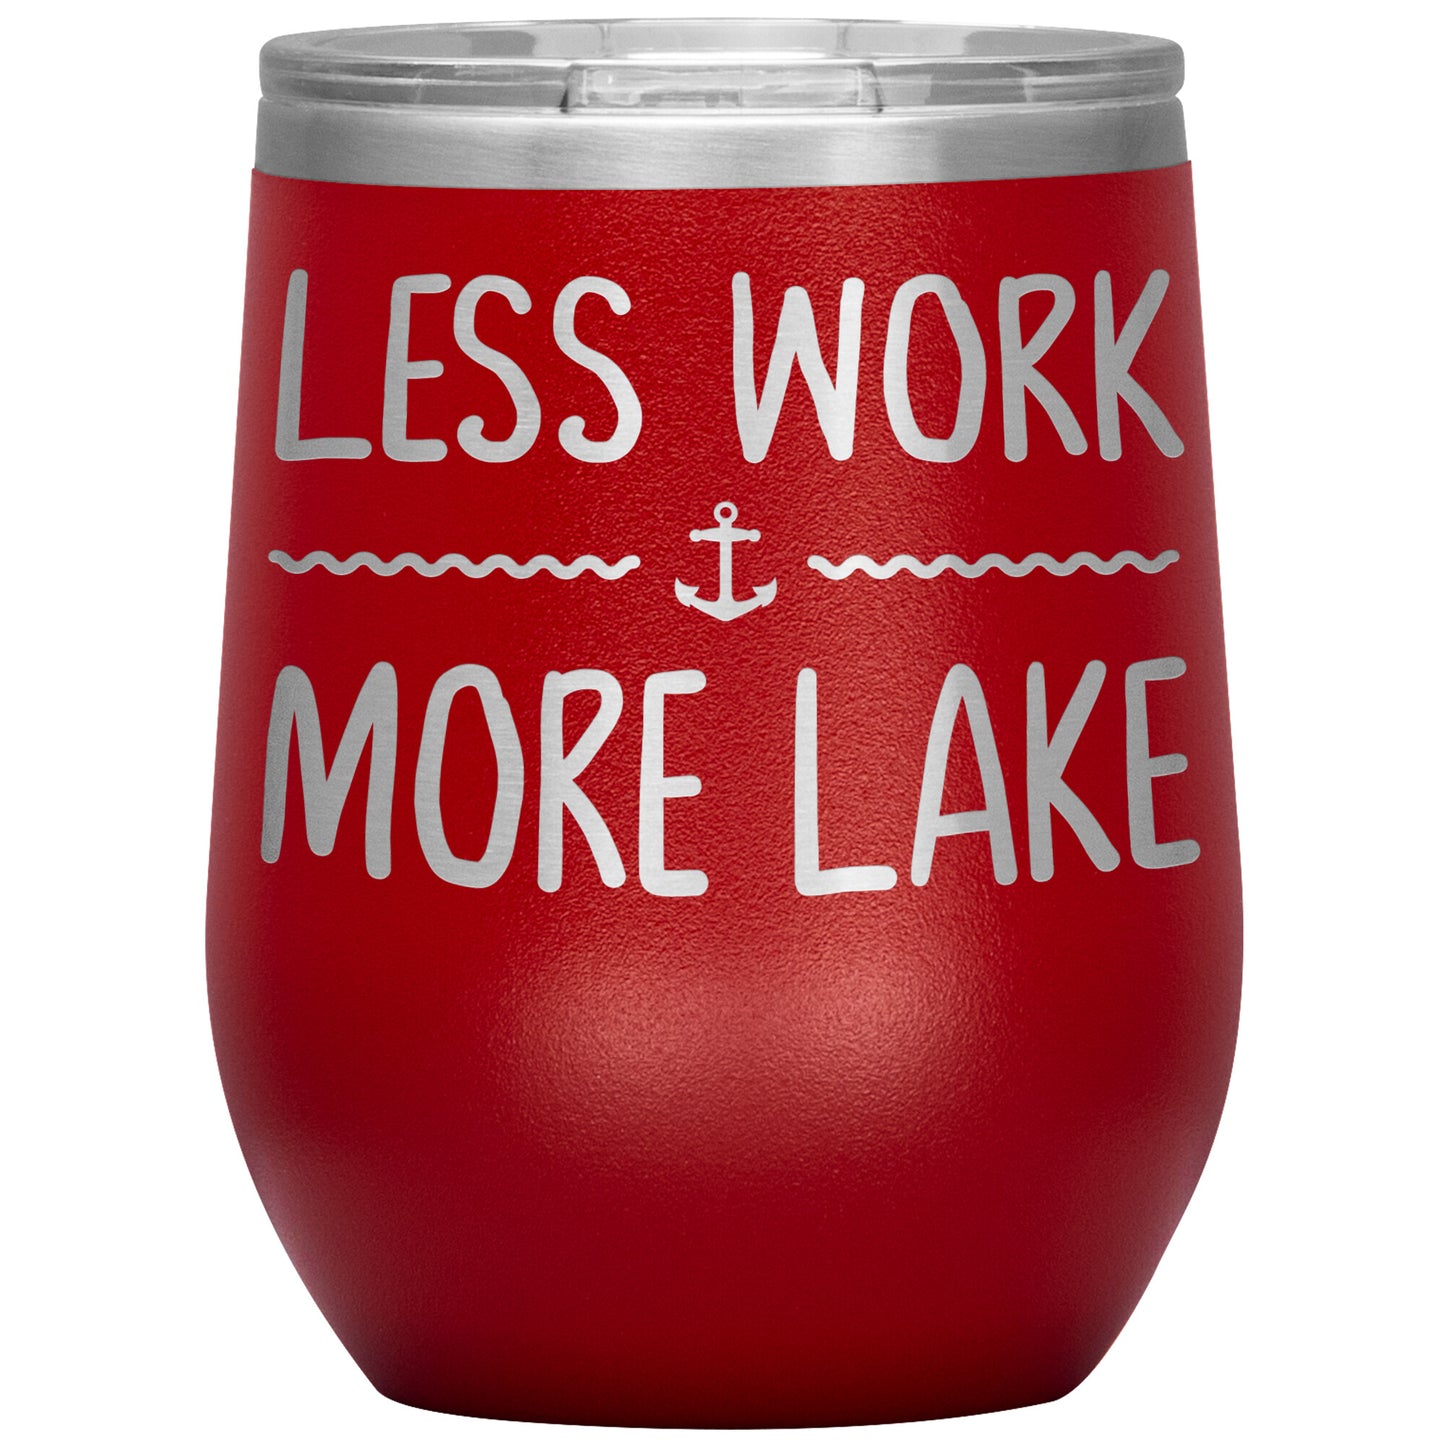 Less Work More Lake 12oz Wine Tumbler - Funny Stemless Cup